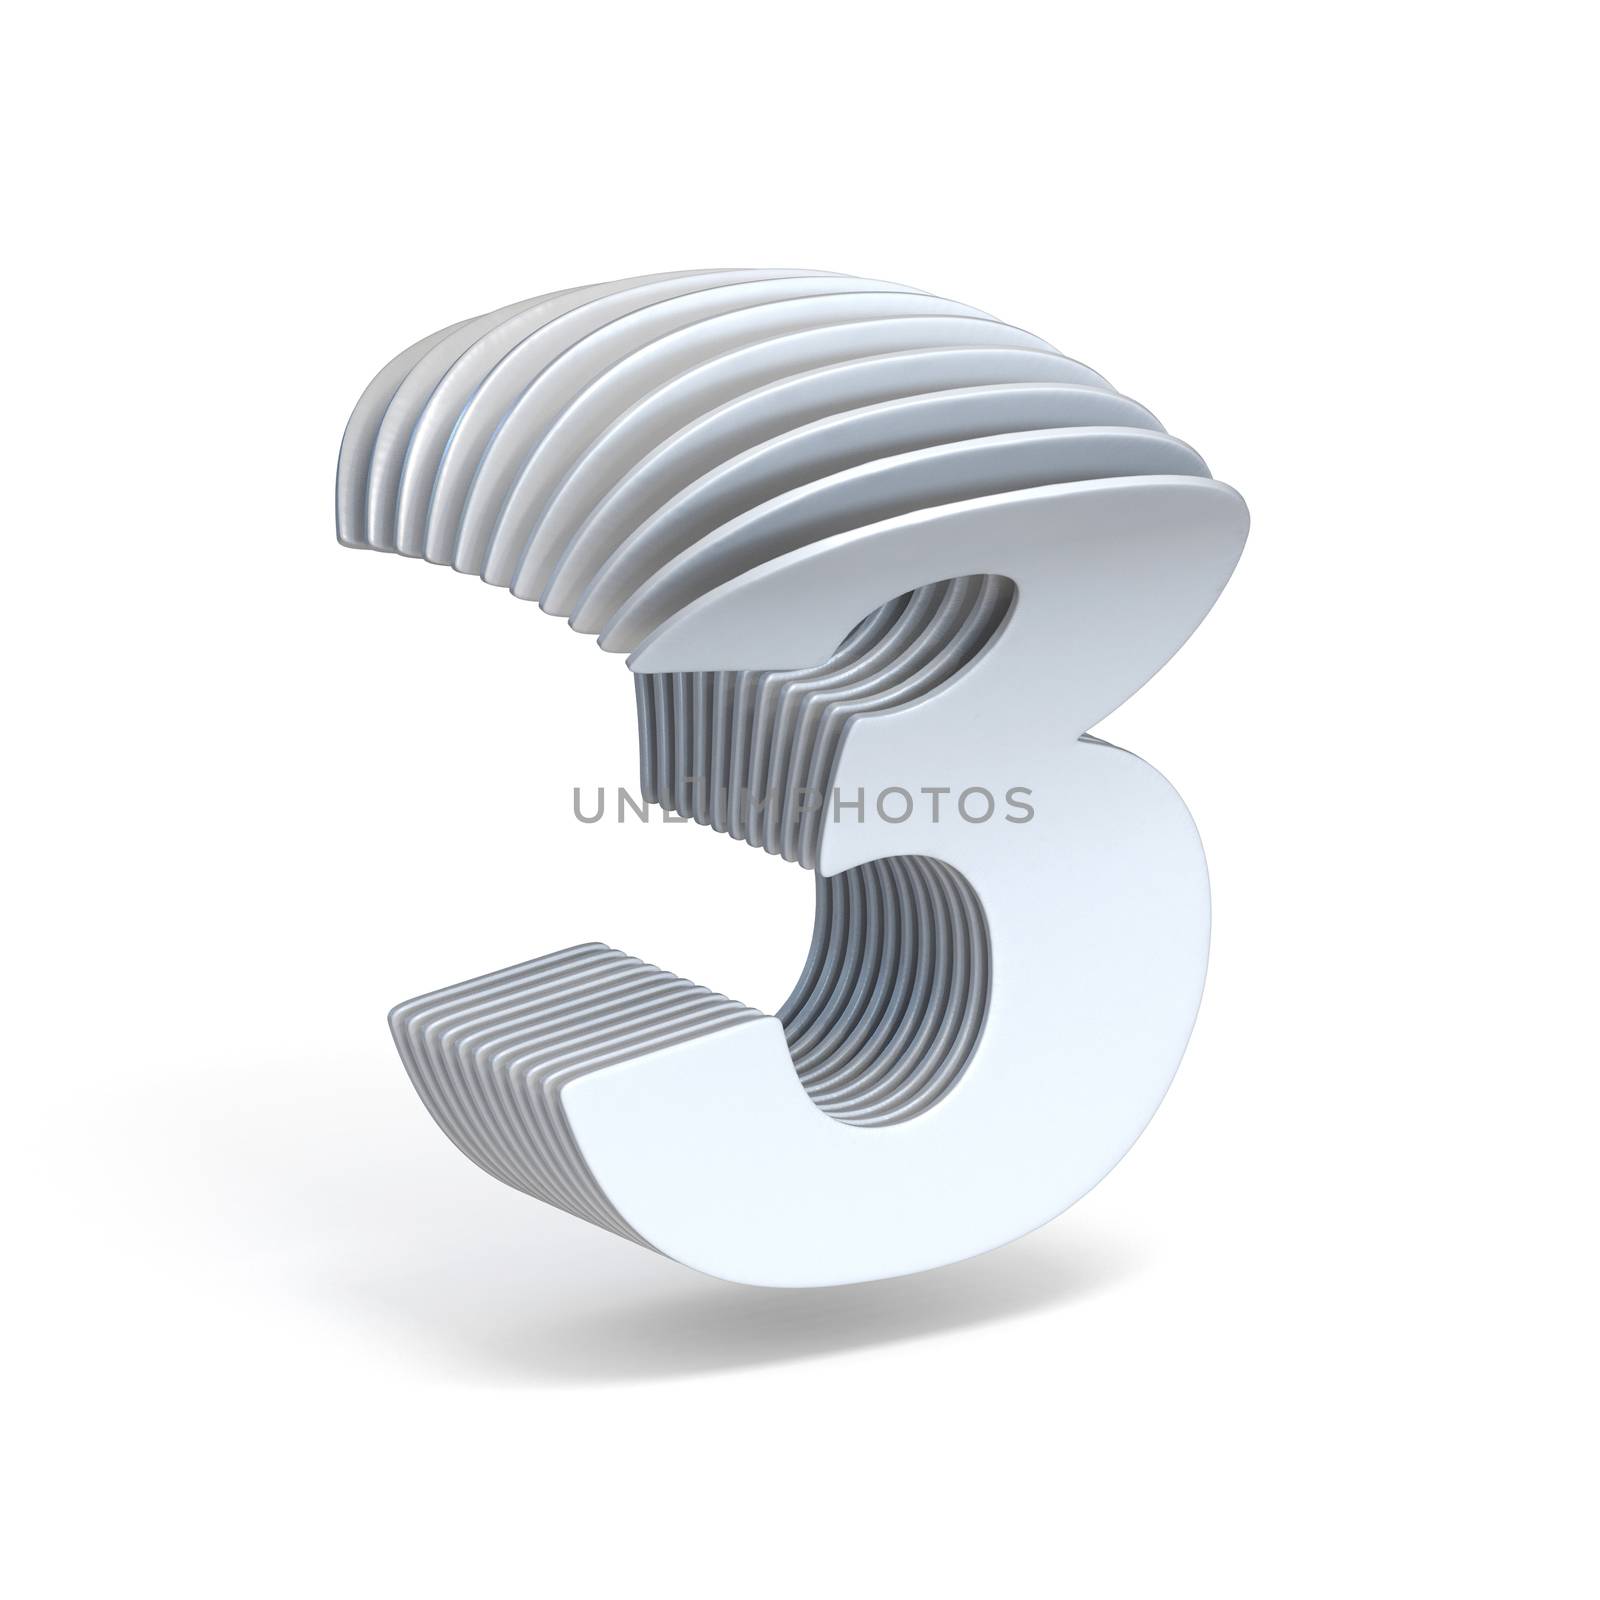 Curved paper sheets Number 3 THREE 3D render illustration isolated on white background